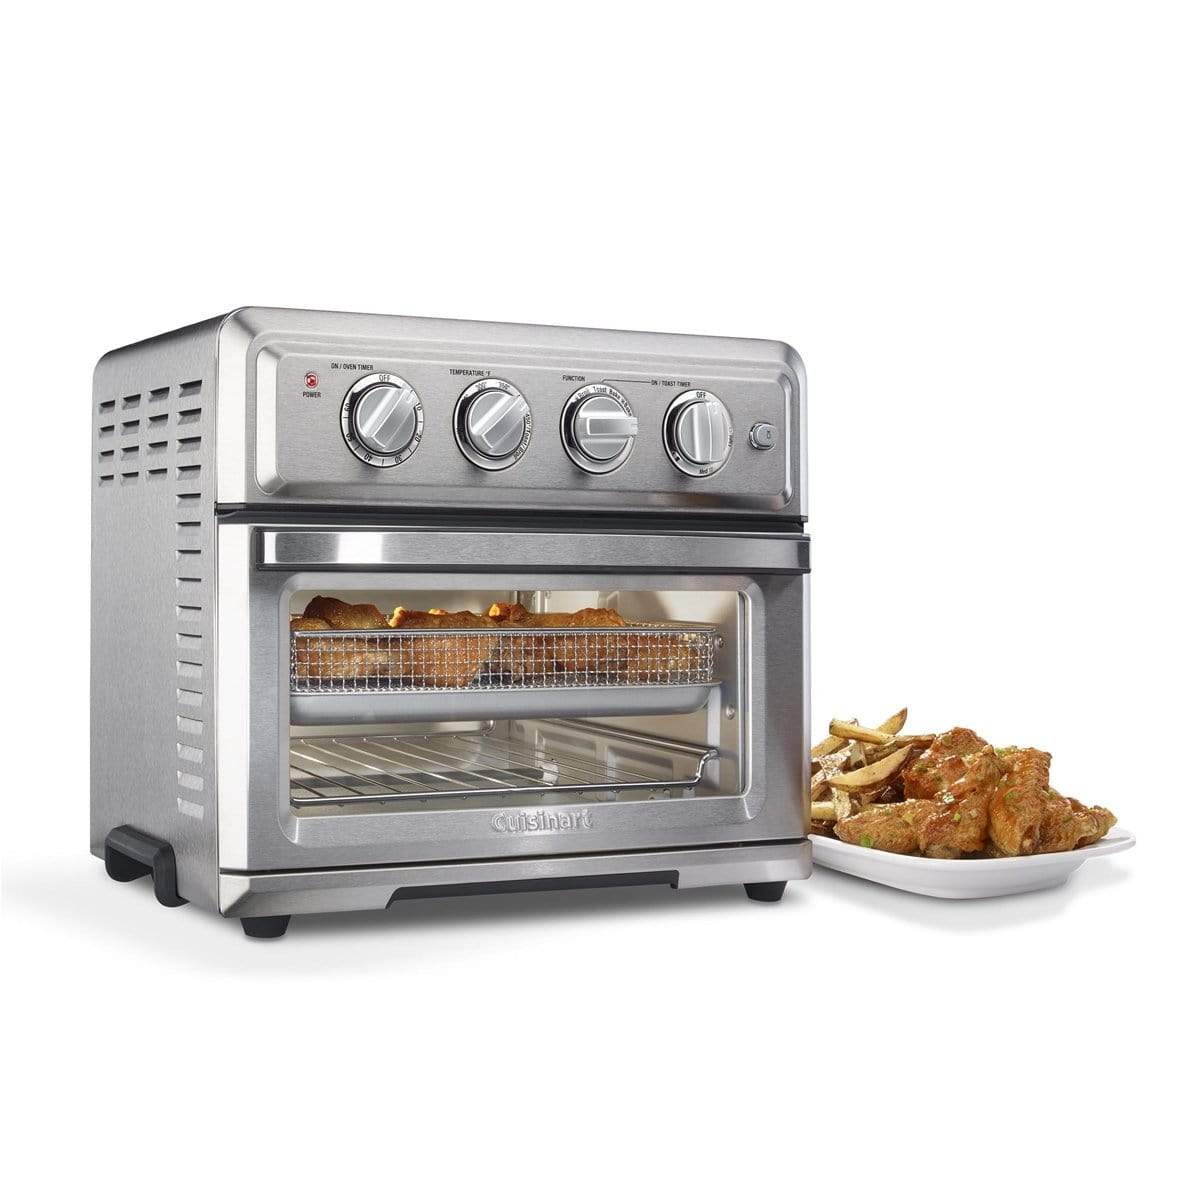 Cuisinart Air Fryer Toaster Oven - Kitchen & Company